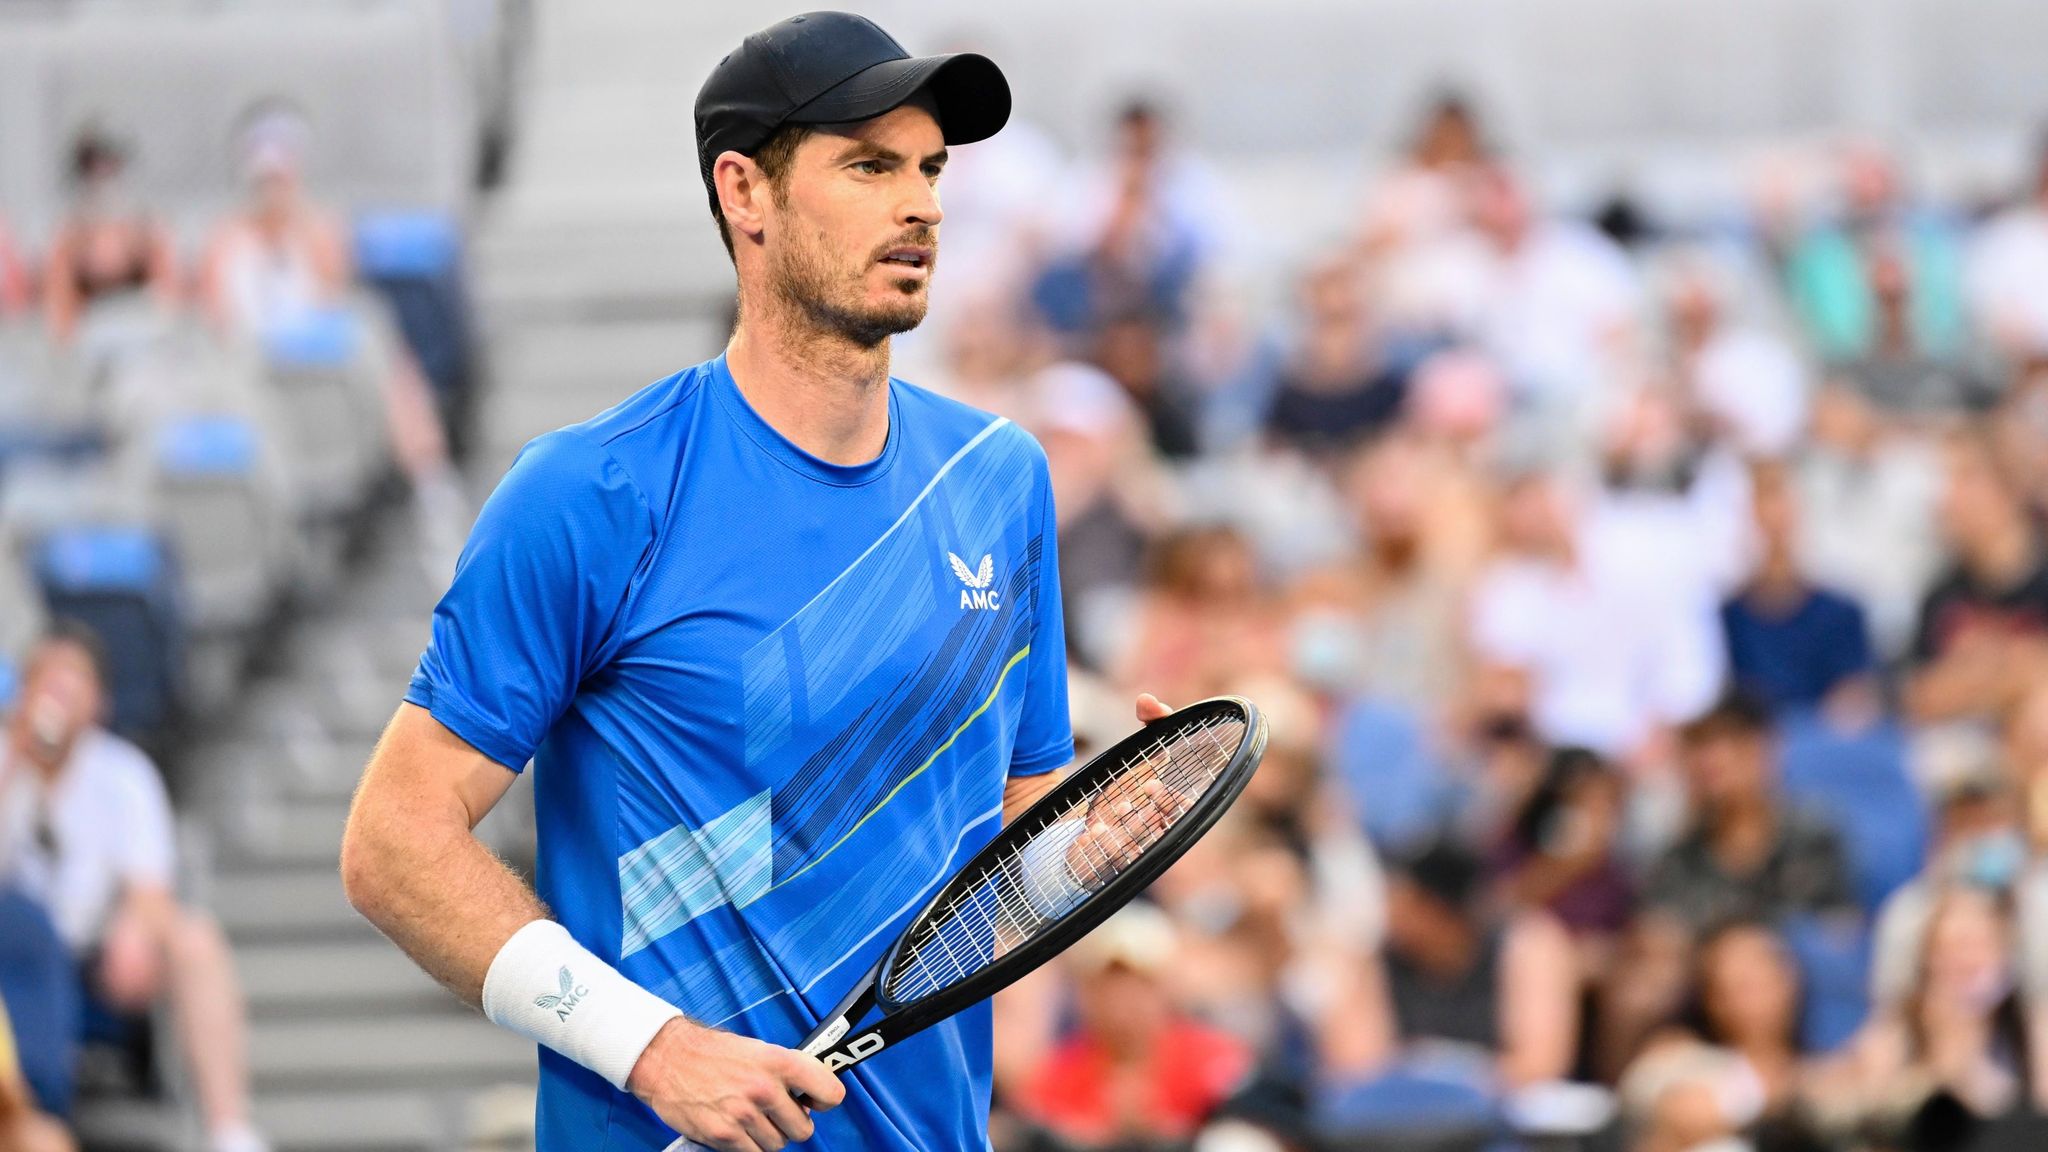 Andy murray knocked out from australian open